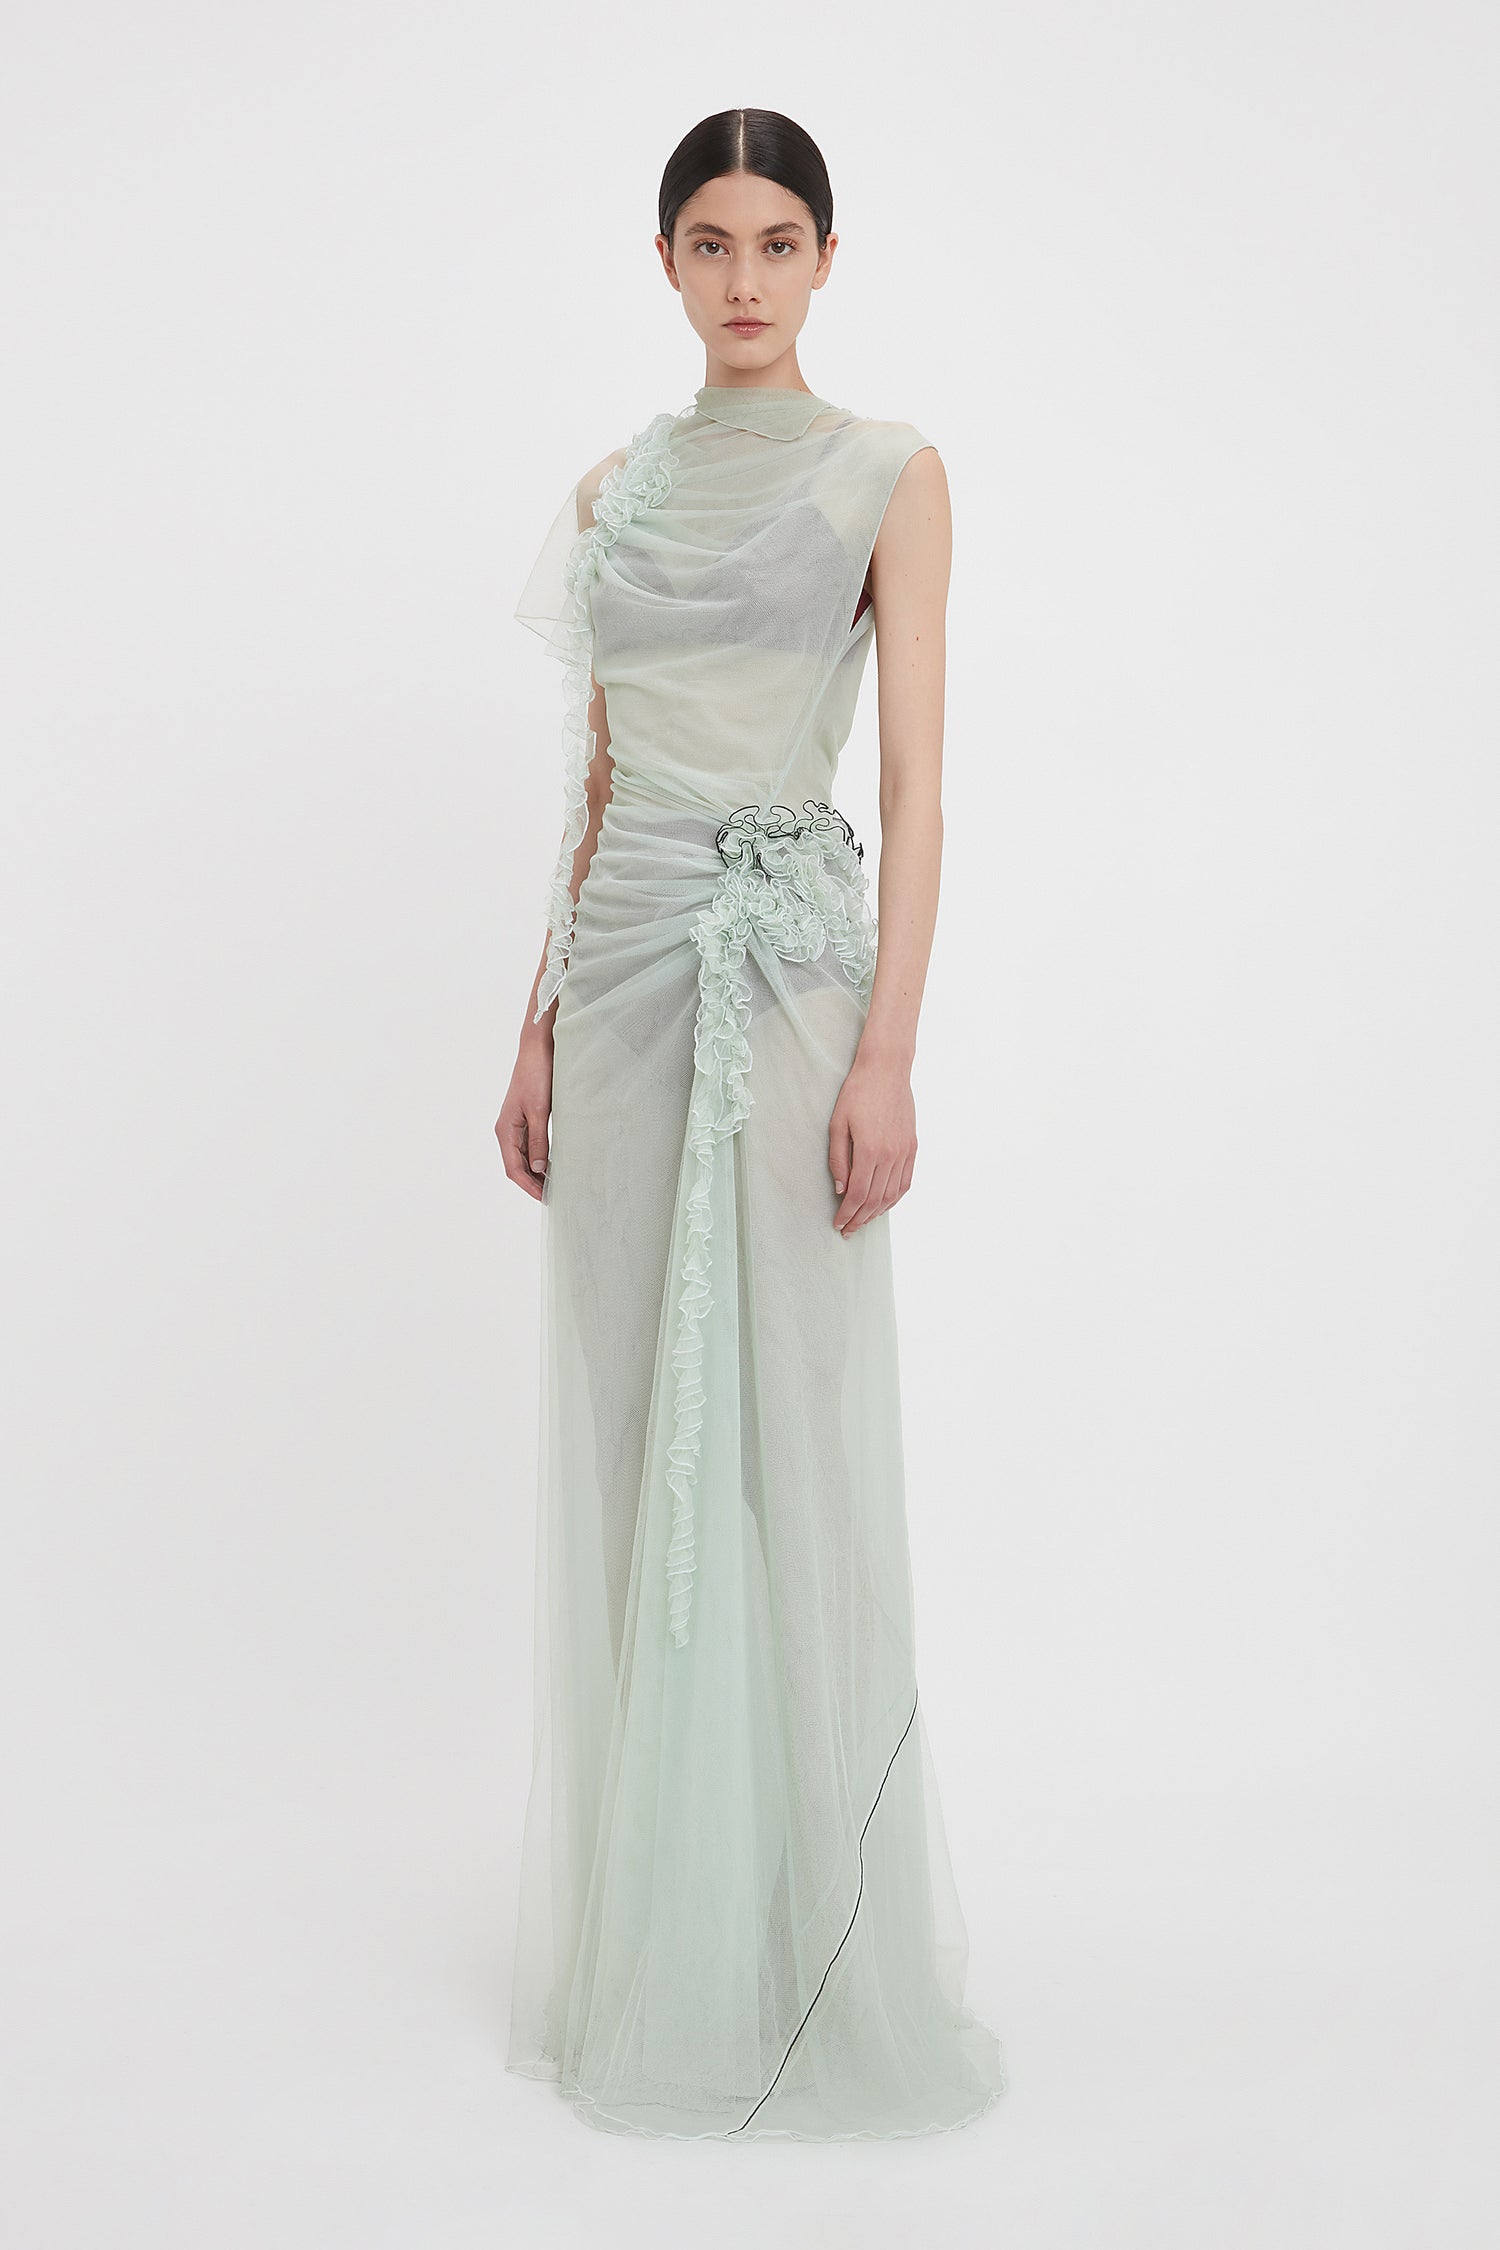 Person wearing a sleeveless, ethereal Gathered Tulle Detail Floor-Length Dress In Jade by Victoria Beckham, with ruched detailing and lace accents on a white background.